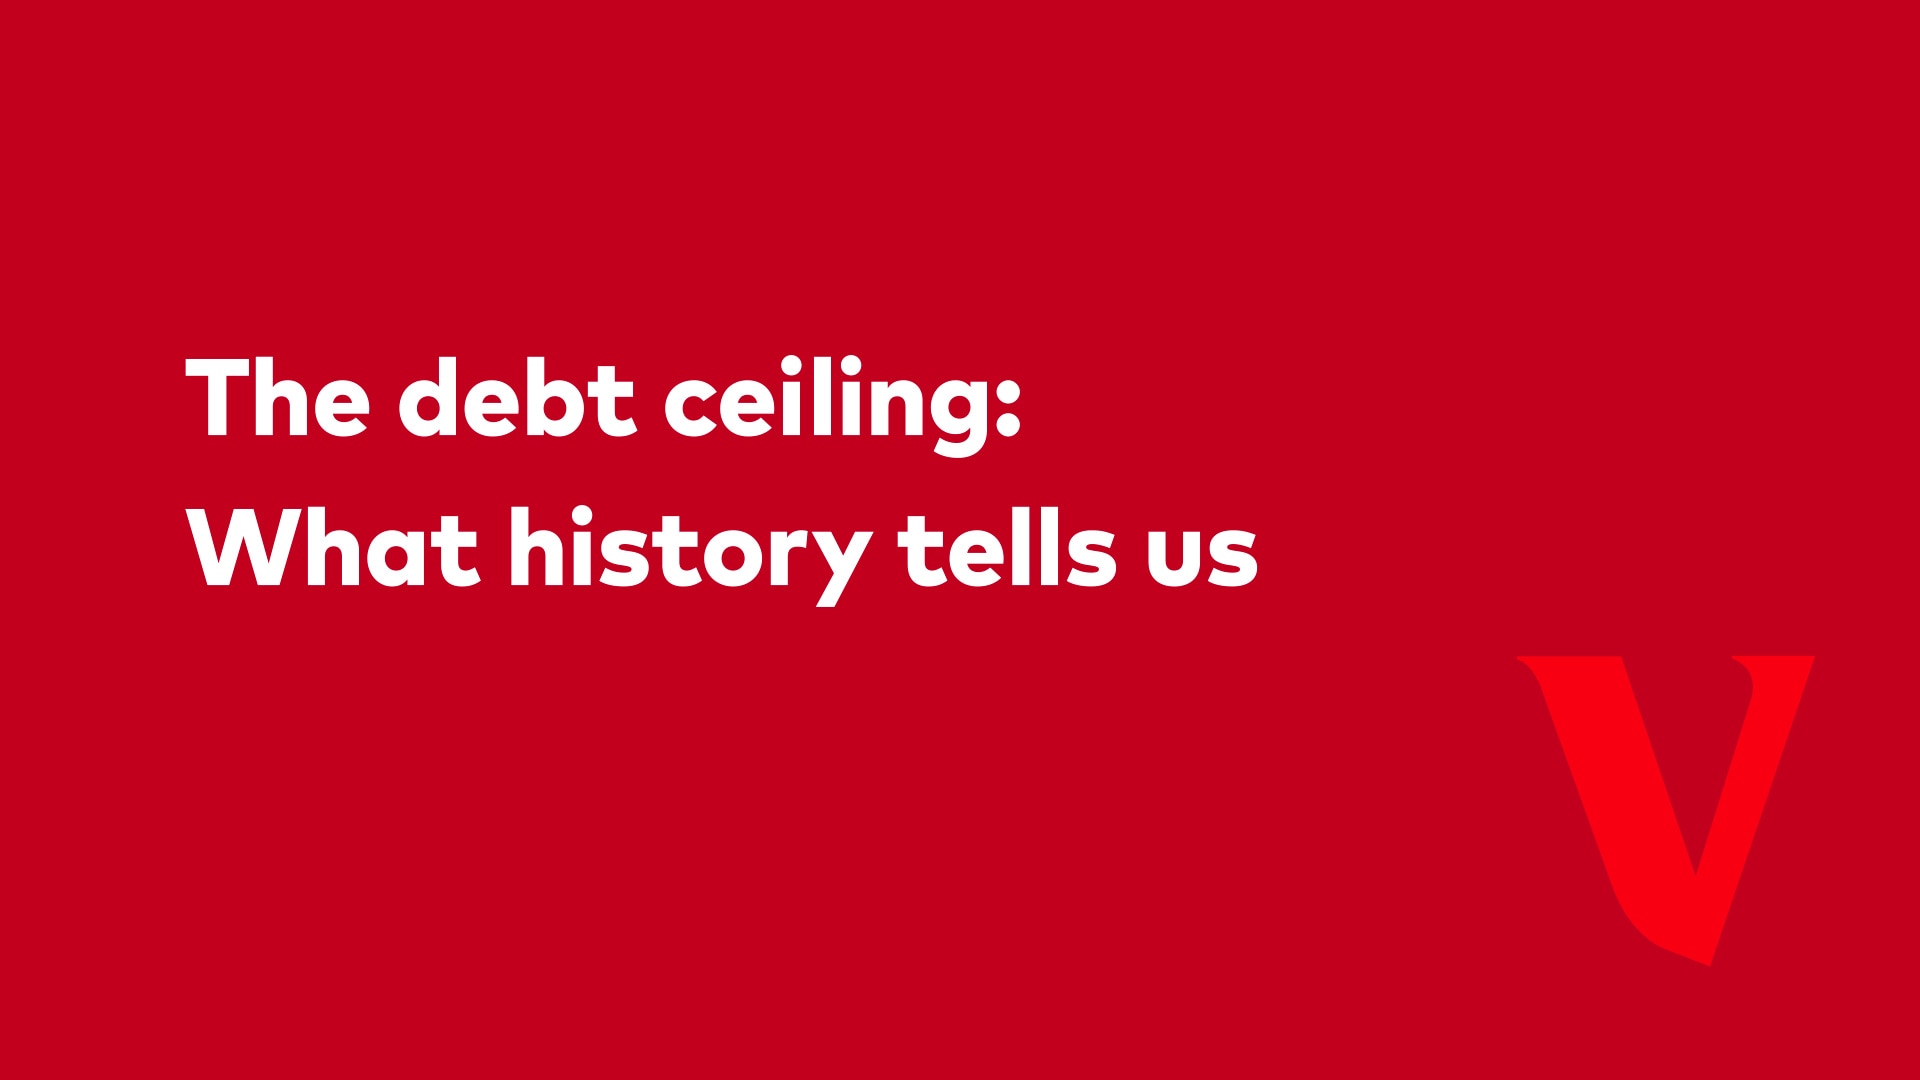 This 2-minute video gives a historical perspective on increases in the U.S. debt limit.